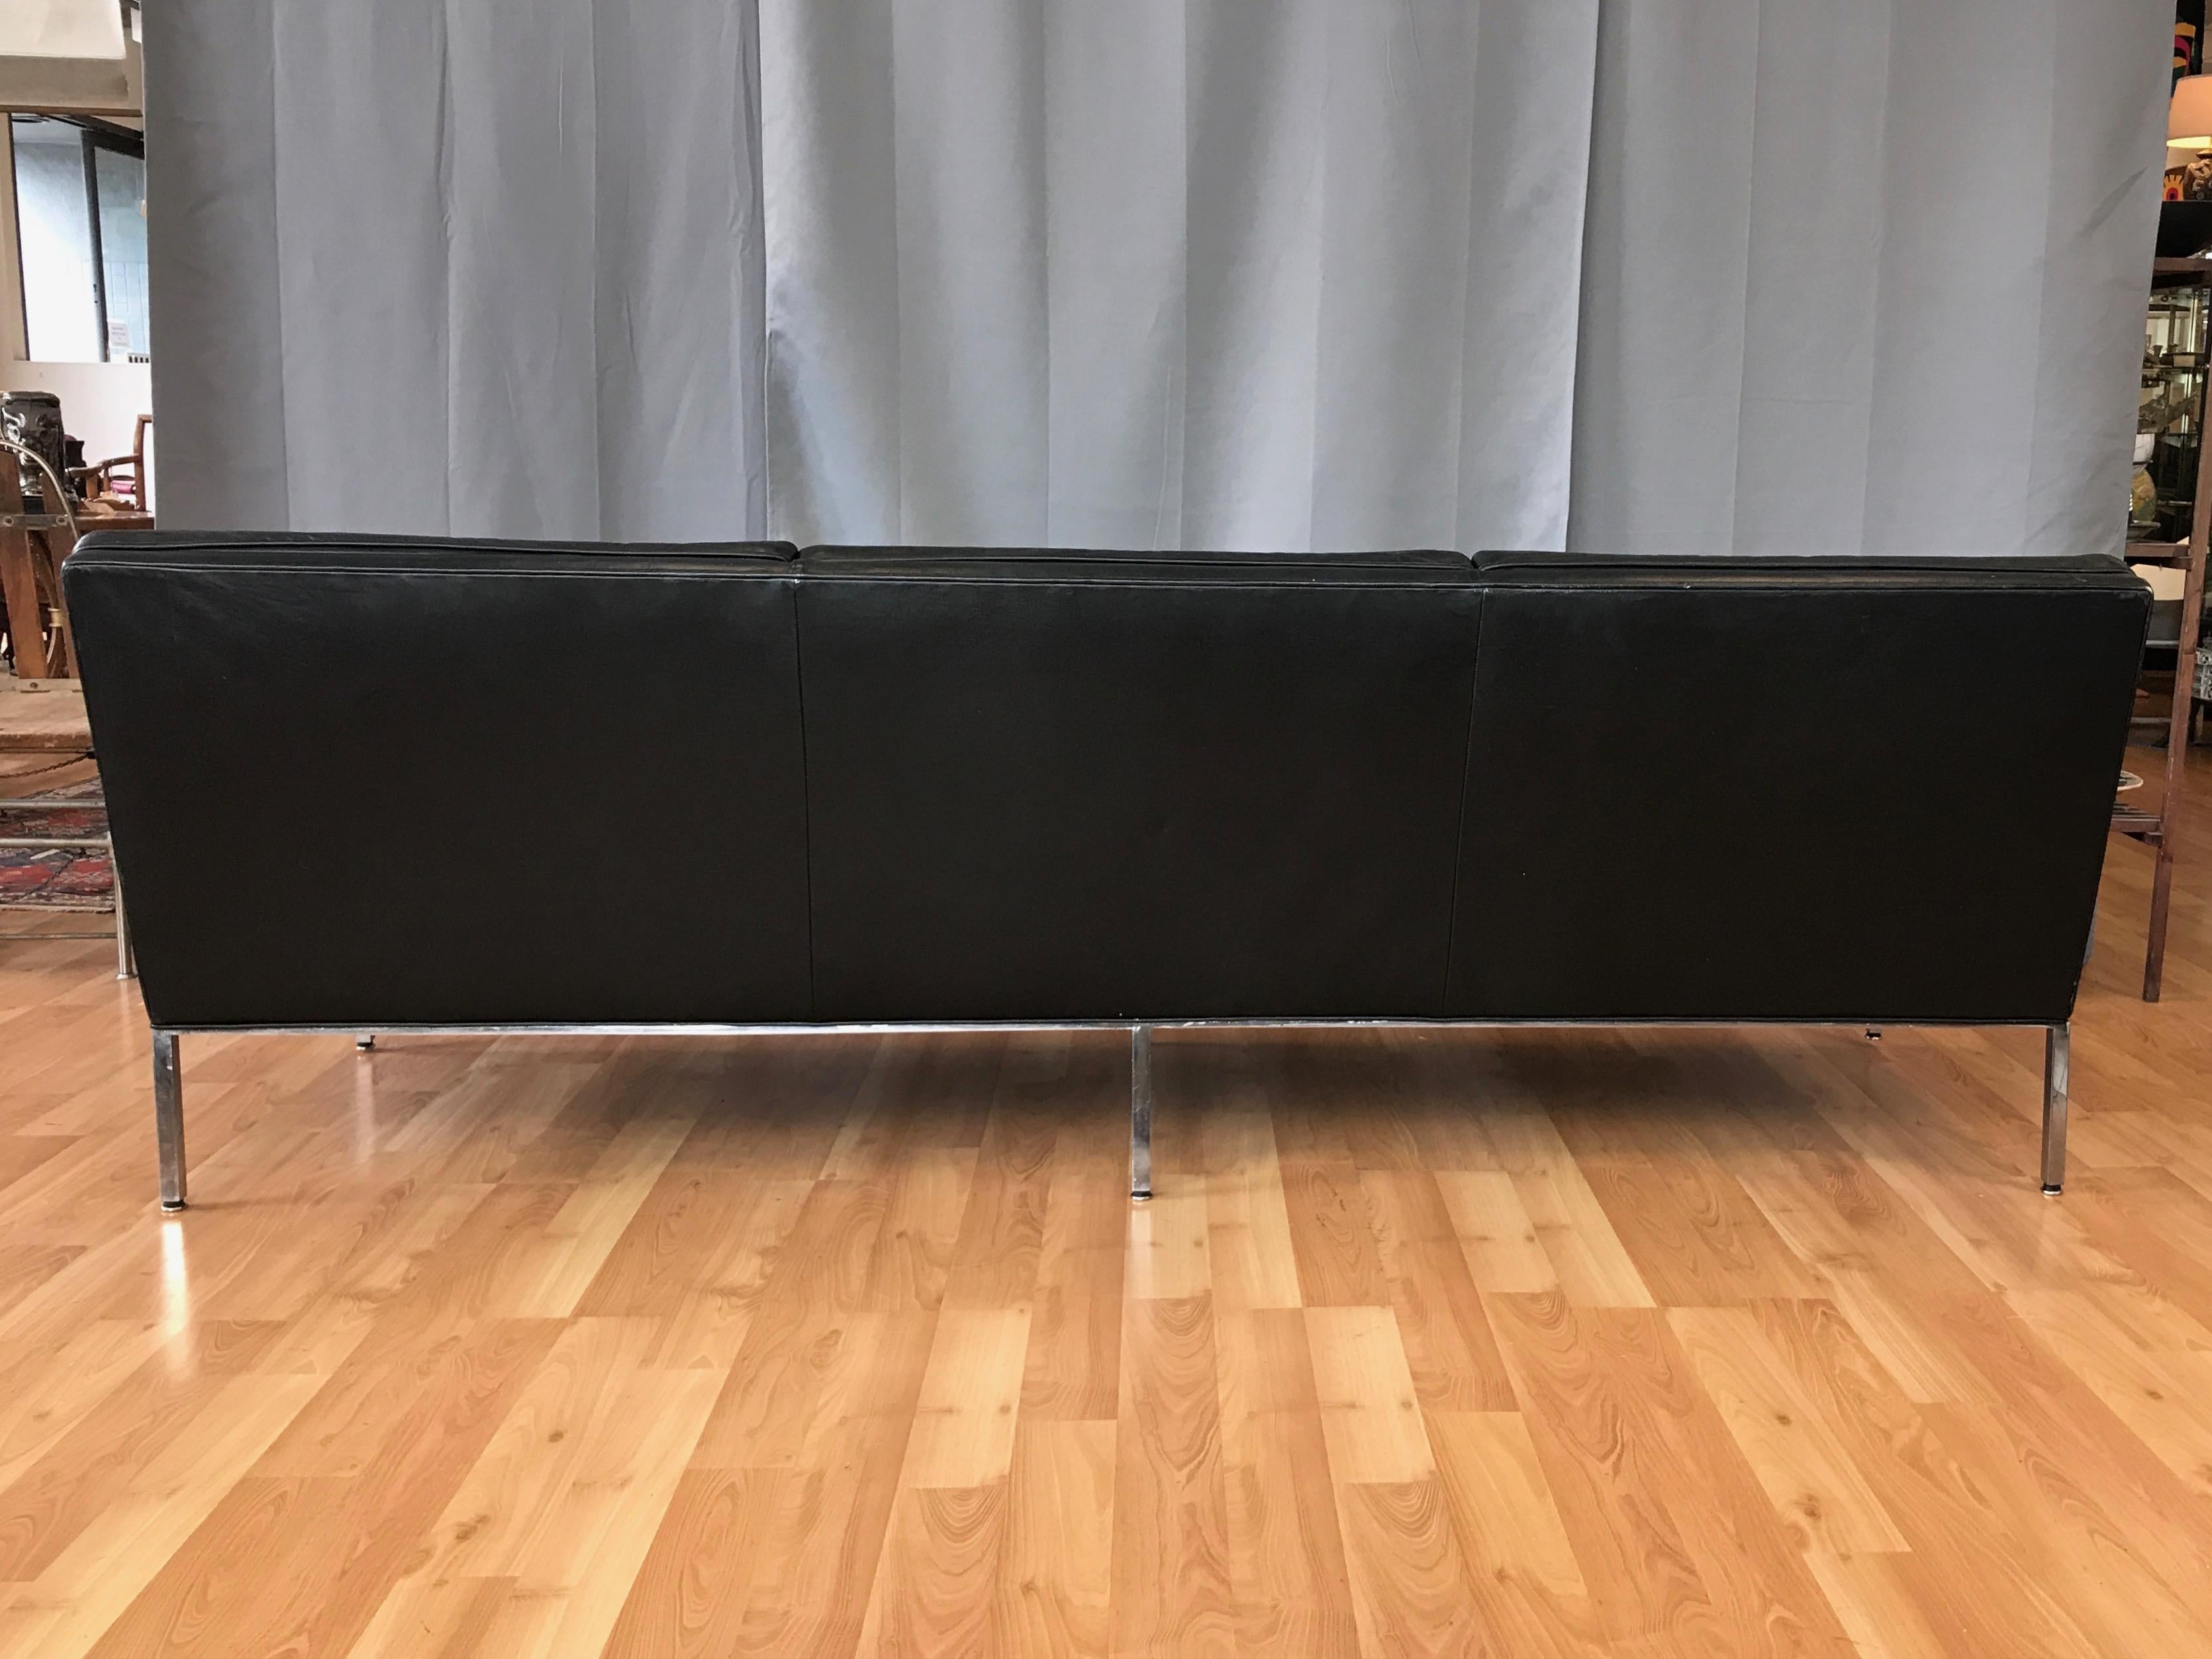 American Steelcase Florence Knoll-Style Extra-Long Tufted Black Leather Sofa, 1960s